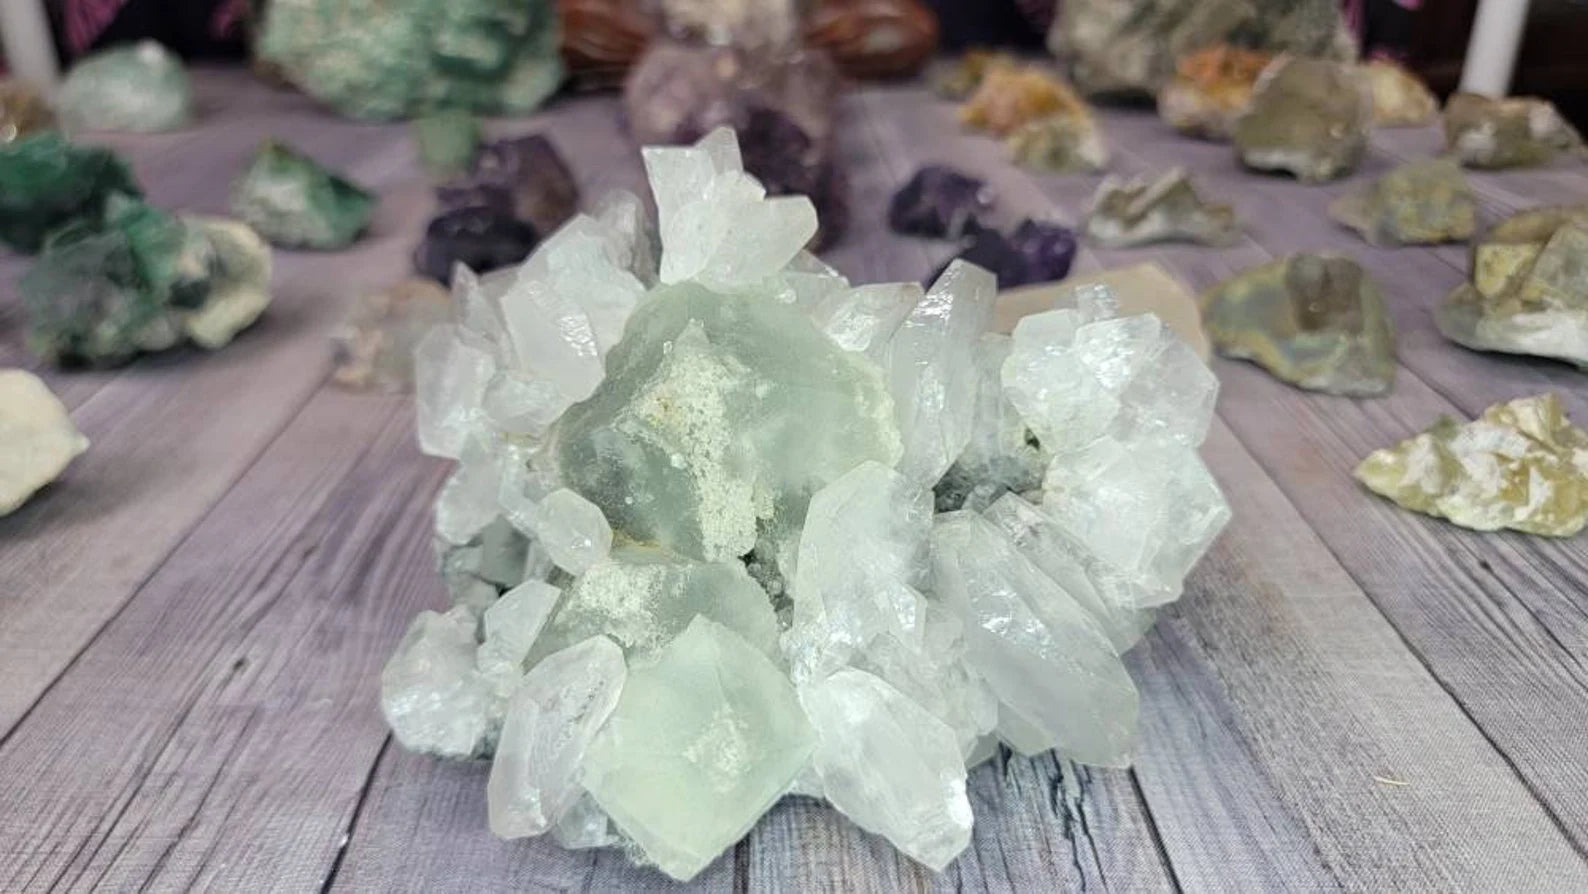 Very Rare Octahedral Fluorite with Shiny Calcite Blades Specimen from China